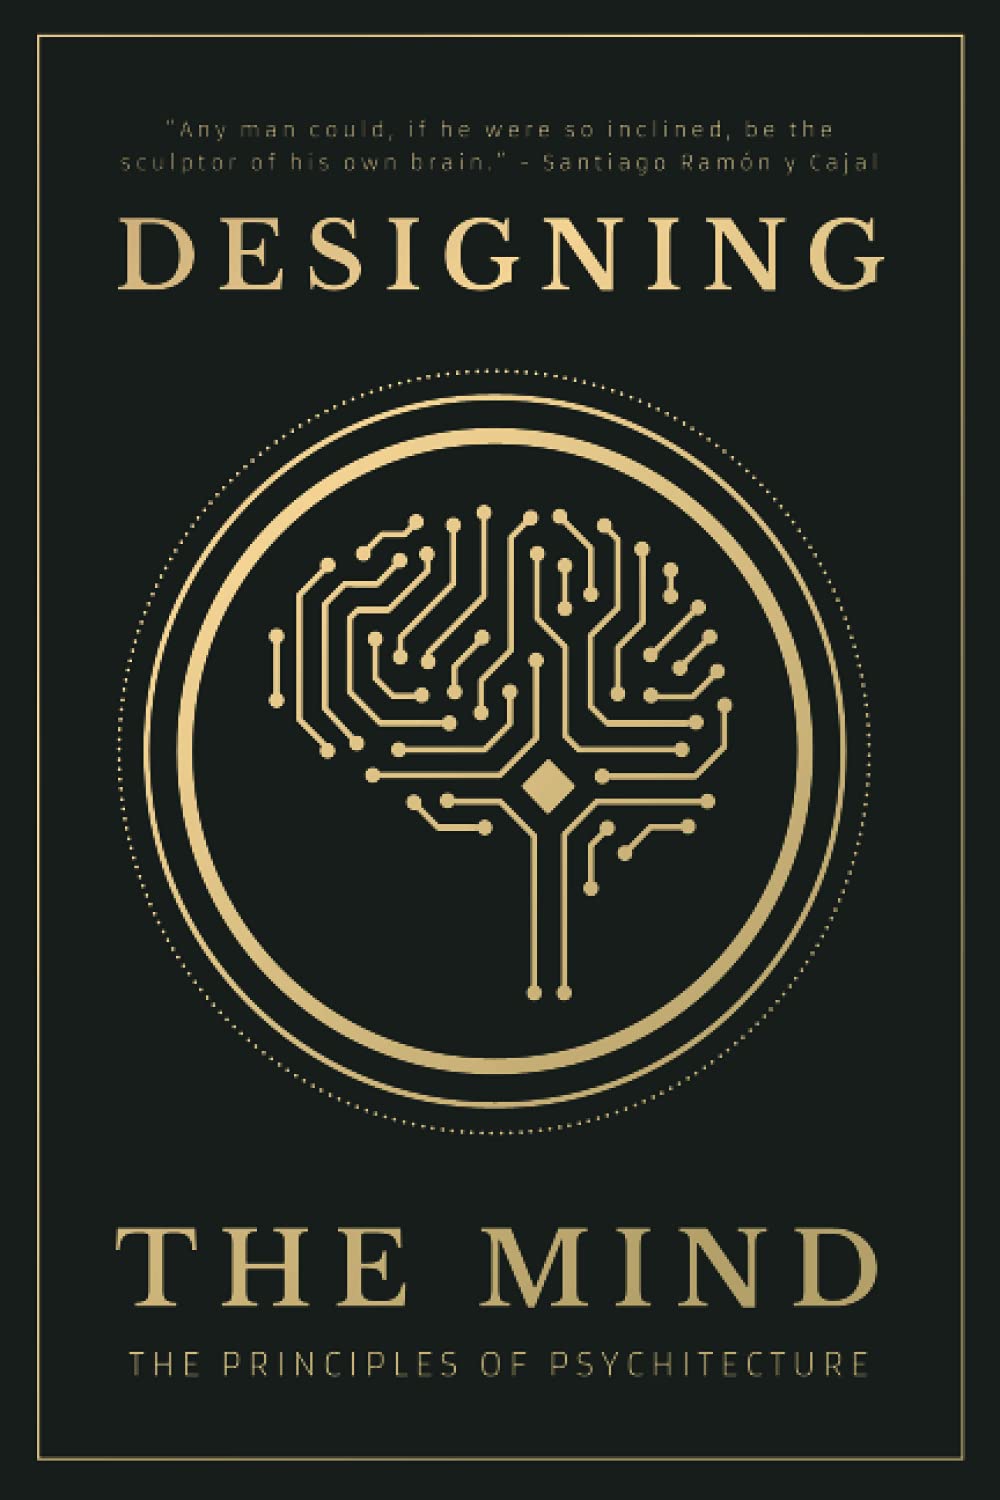 Designing the Mind: The Principles of Psychitecture (Paperback)